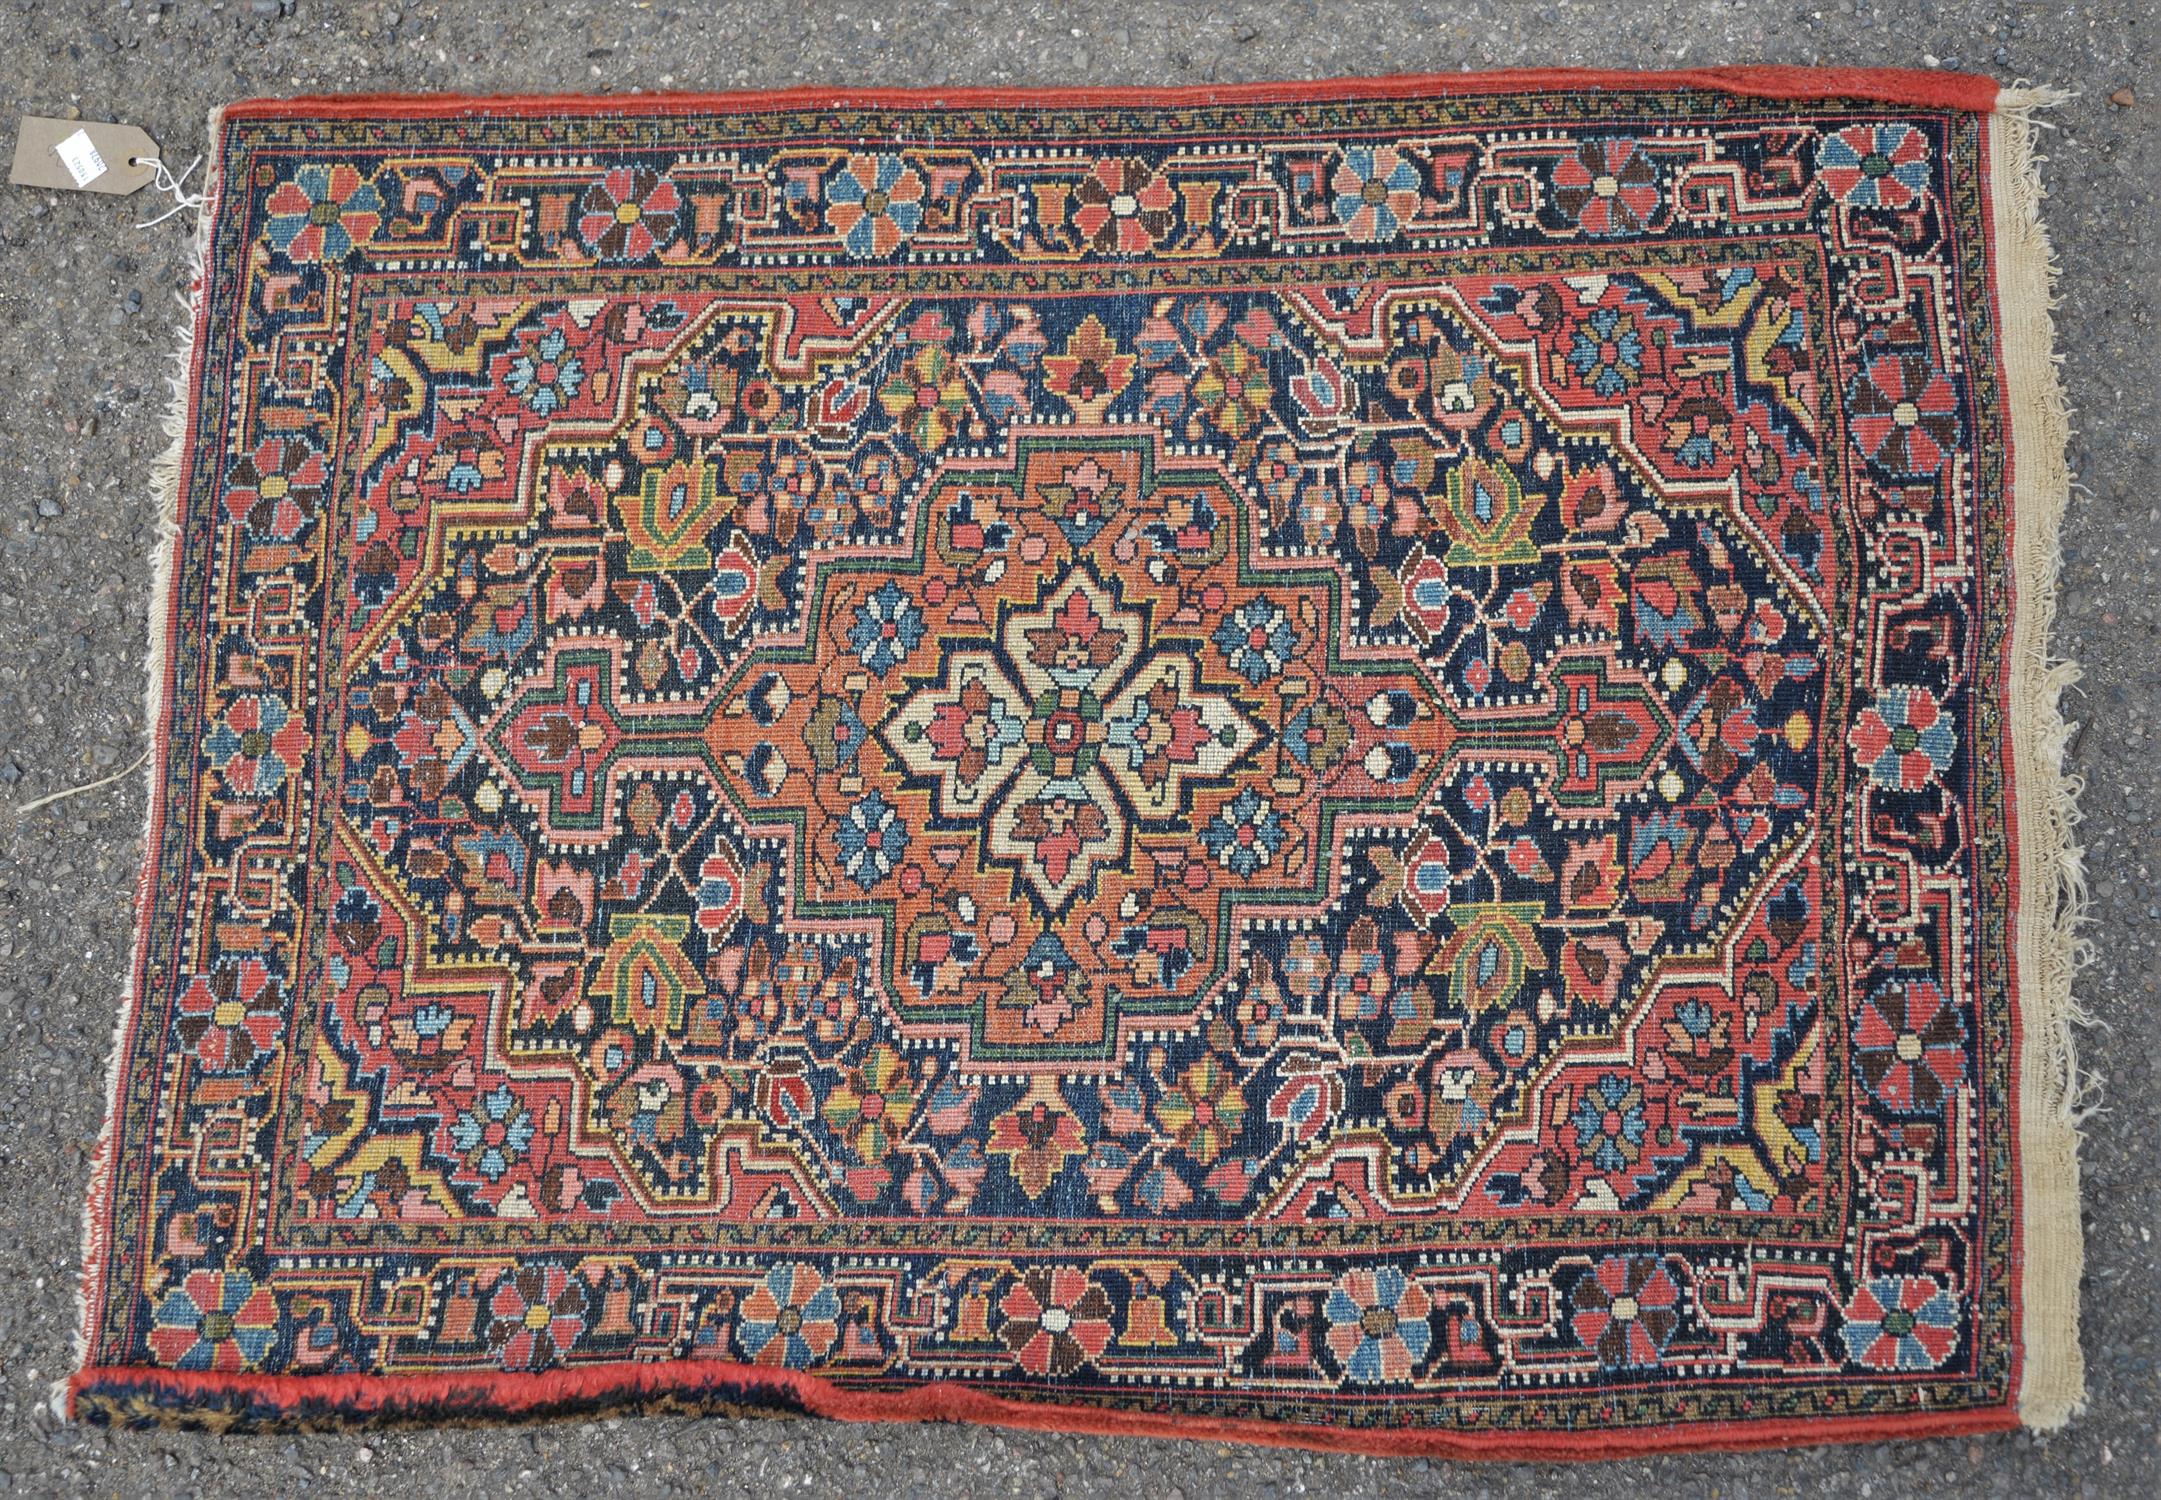 Small Persian mat or rug, 20th Century, central stepped motif, with central floral design, - Image 2 of 2